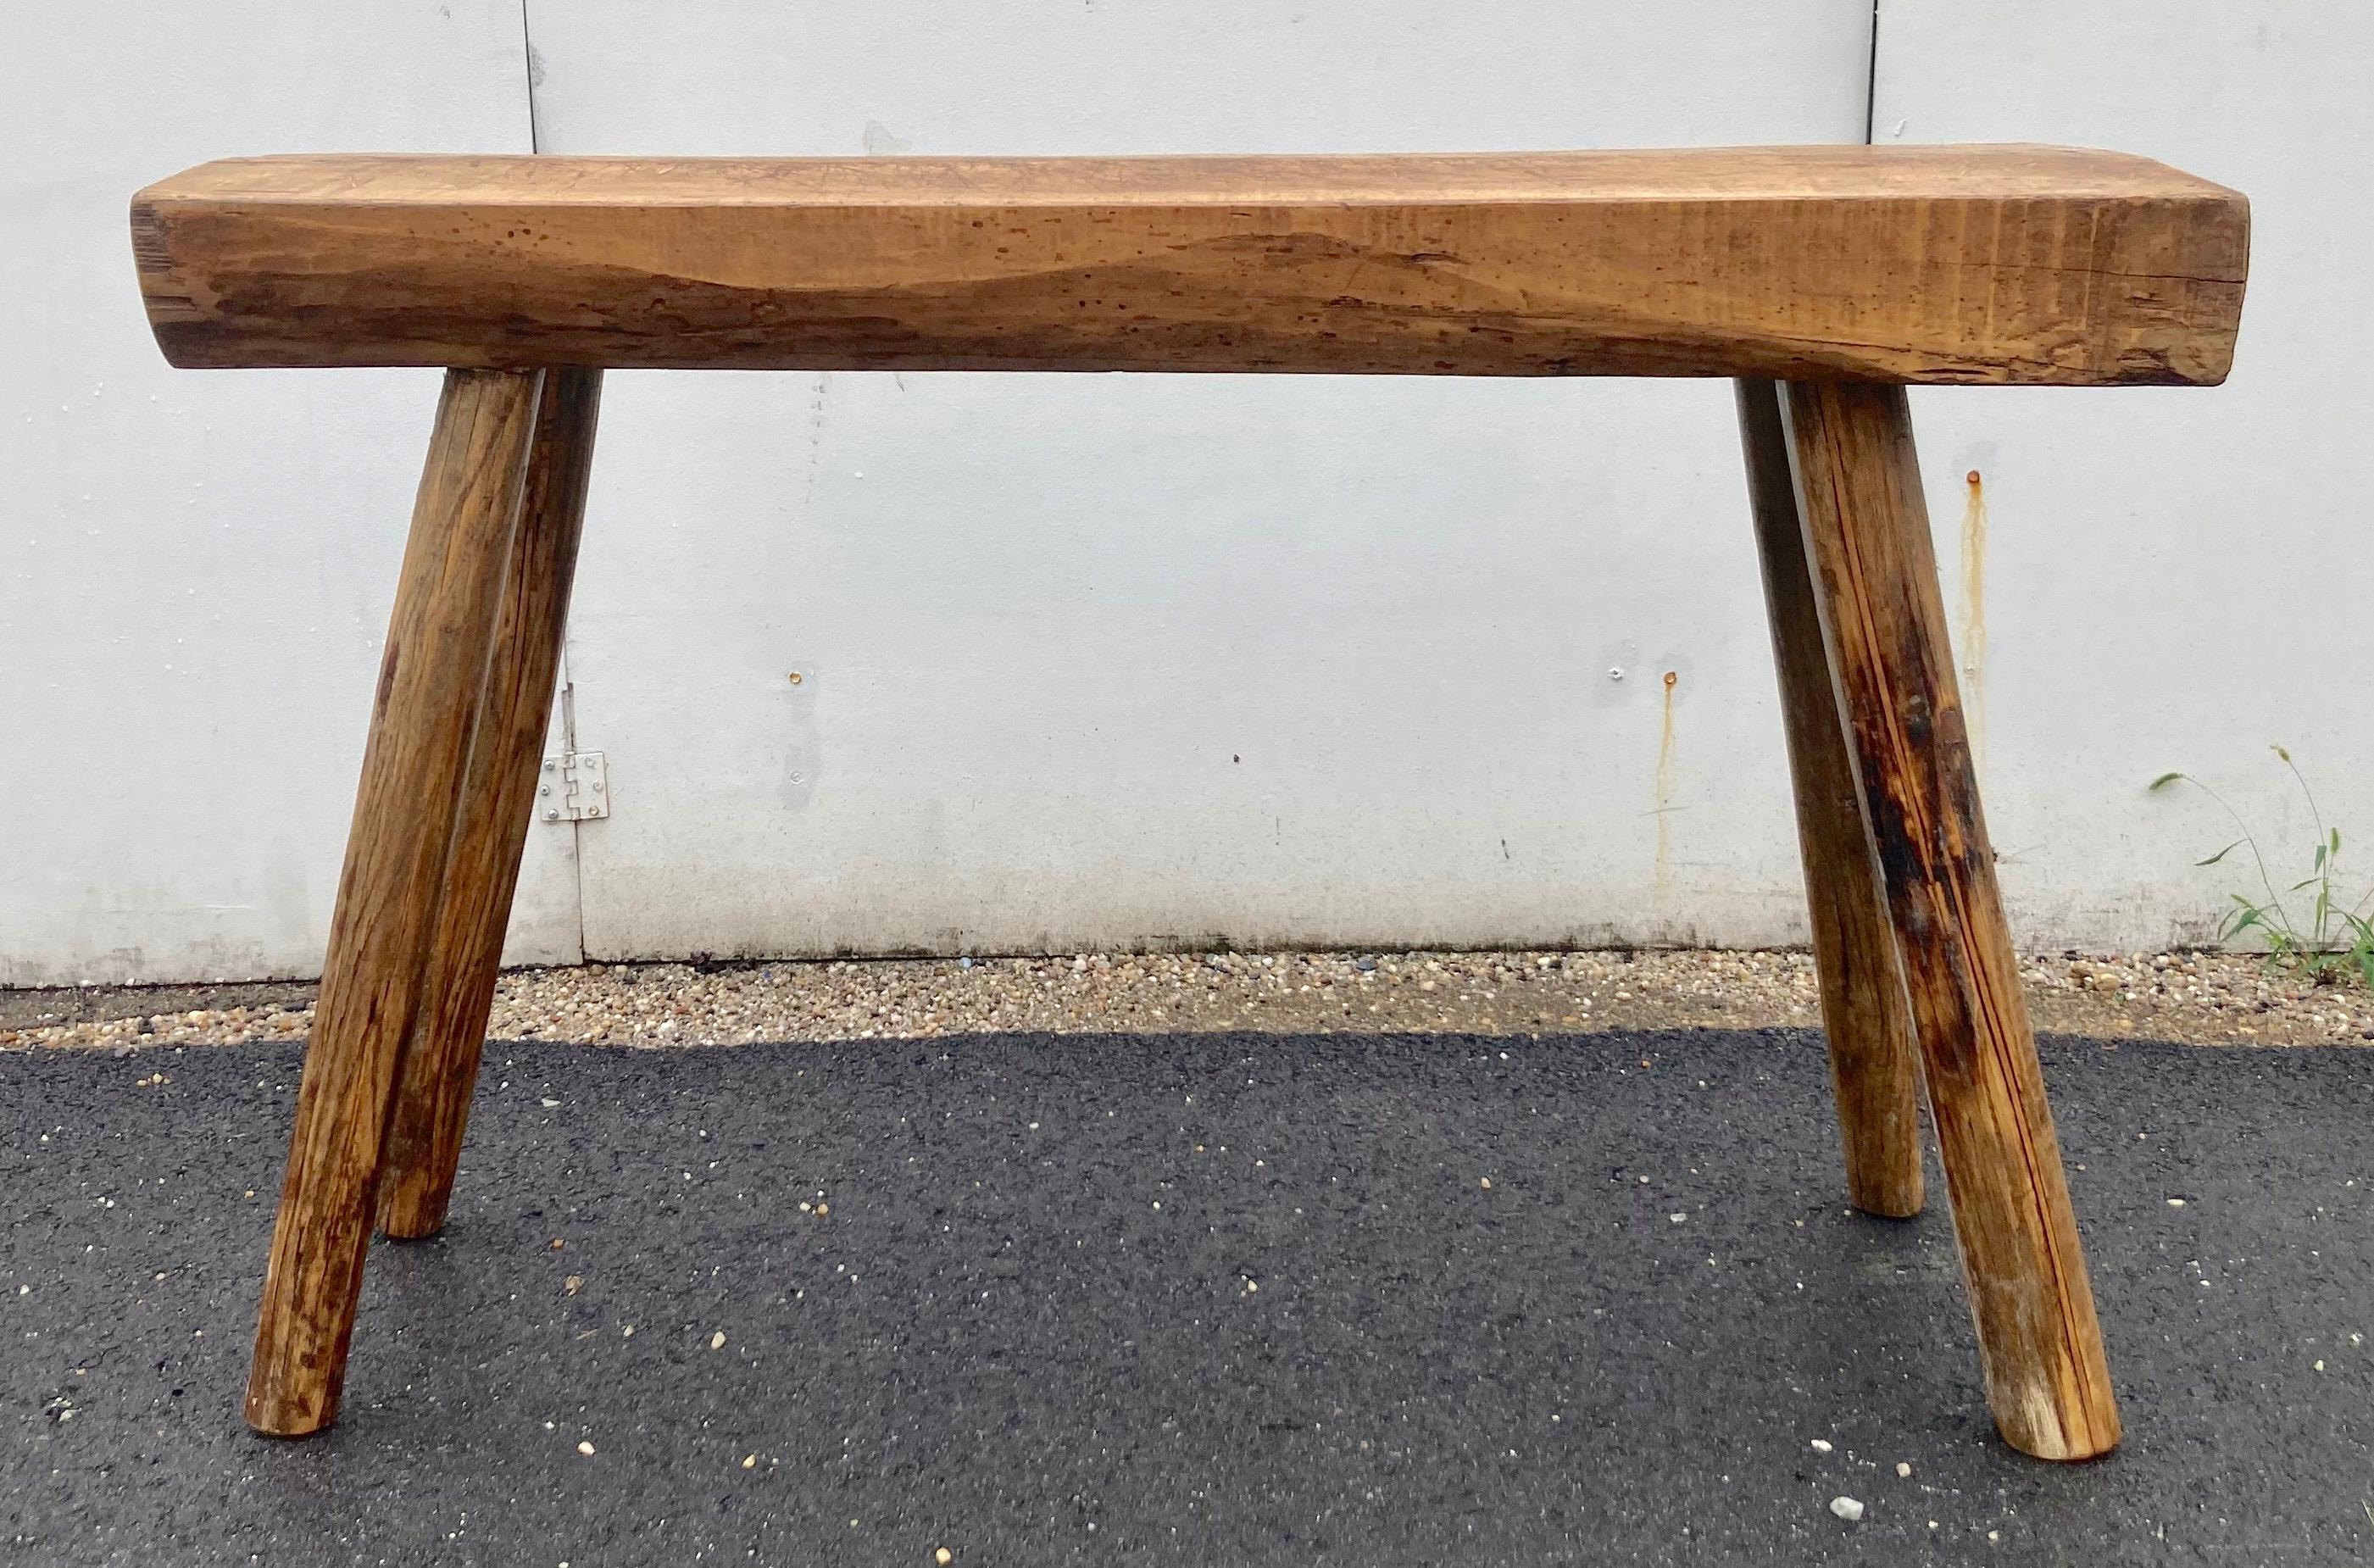 The top of this tough little work table is comprised of a single slab of oak, almost 4” thick and almost 4’ long, sectioned from the trunk with one end still following the line of the tree, the other end squared off.  The surface is covered with the